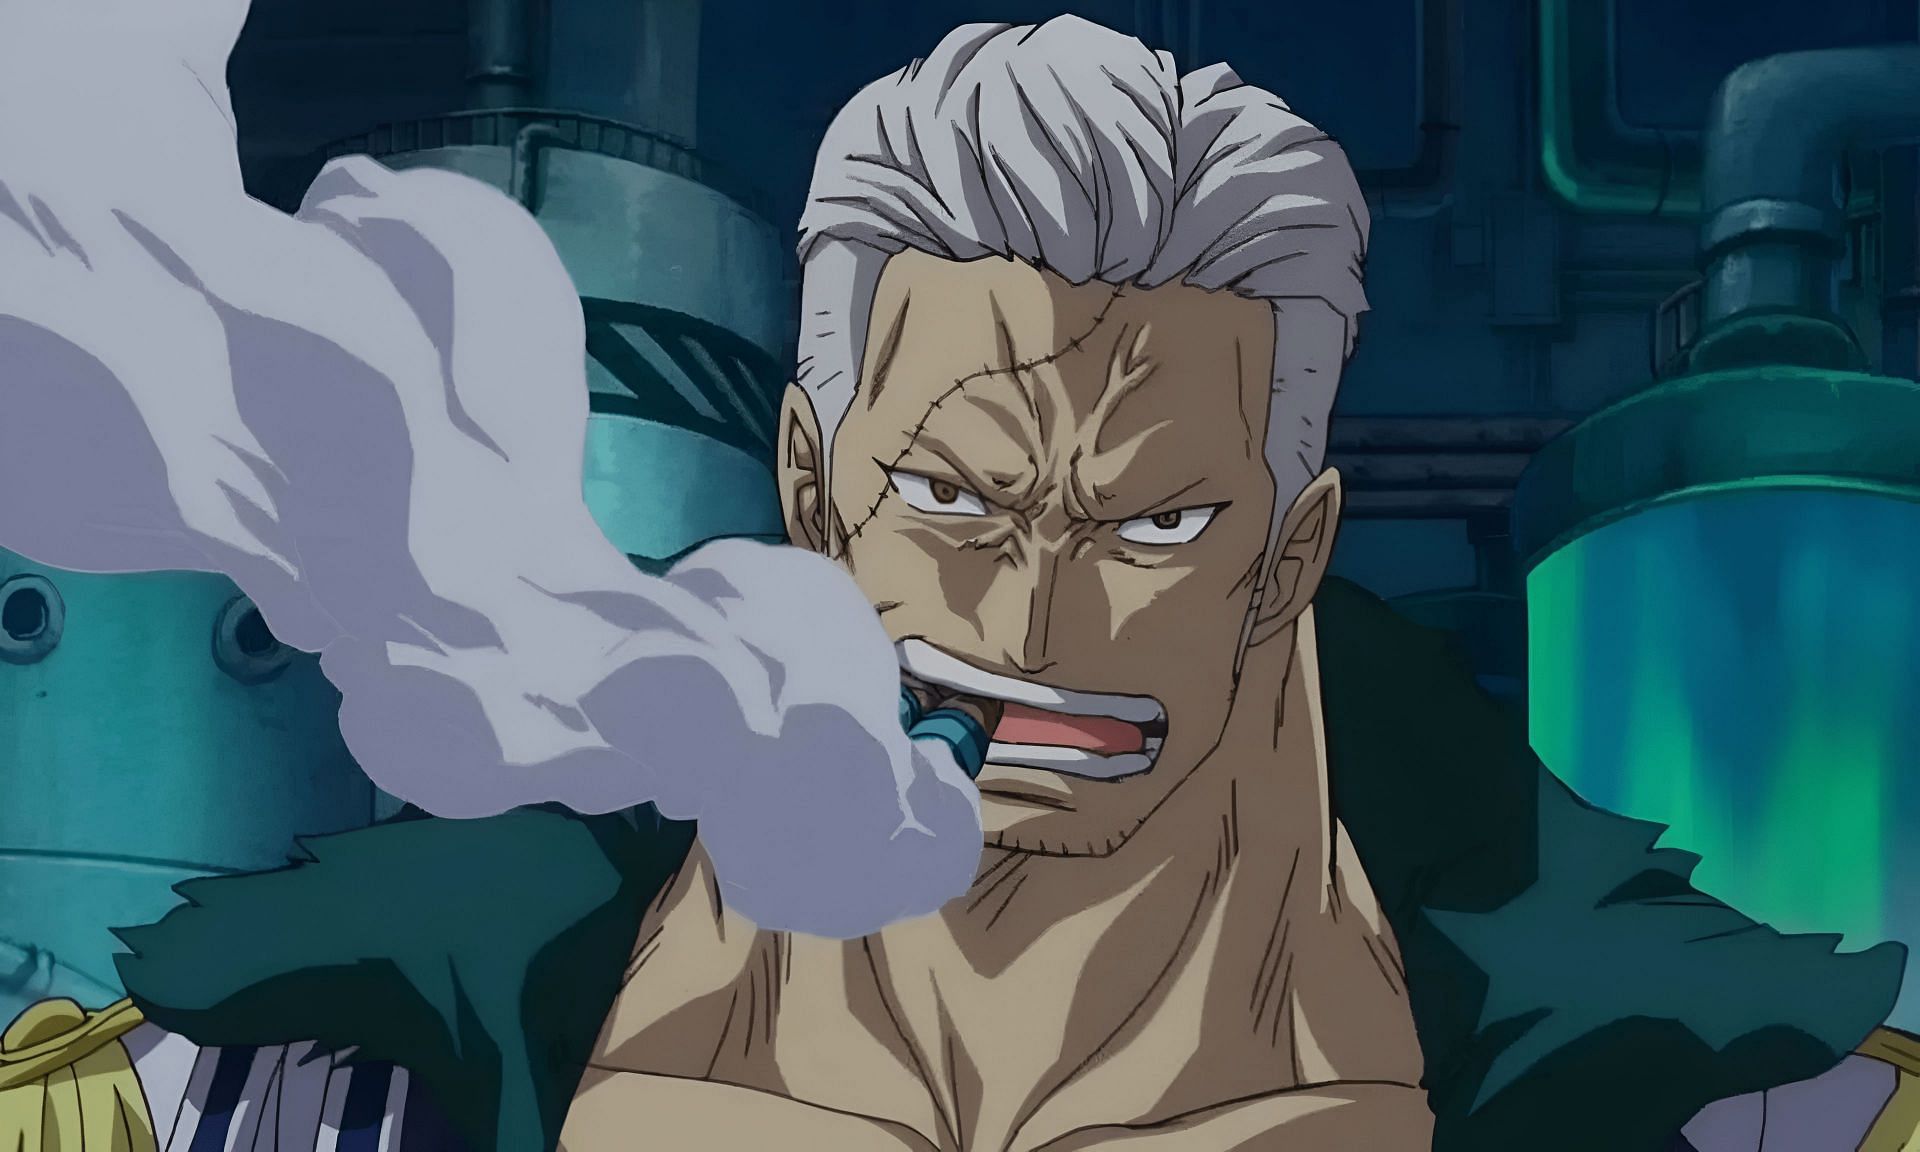 Smoker as seen in One Piece (Image via Toei Animation)